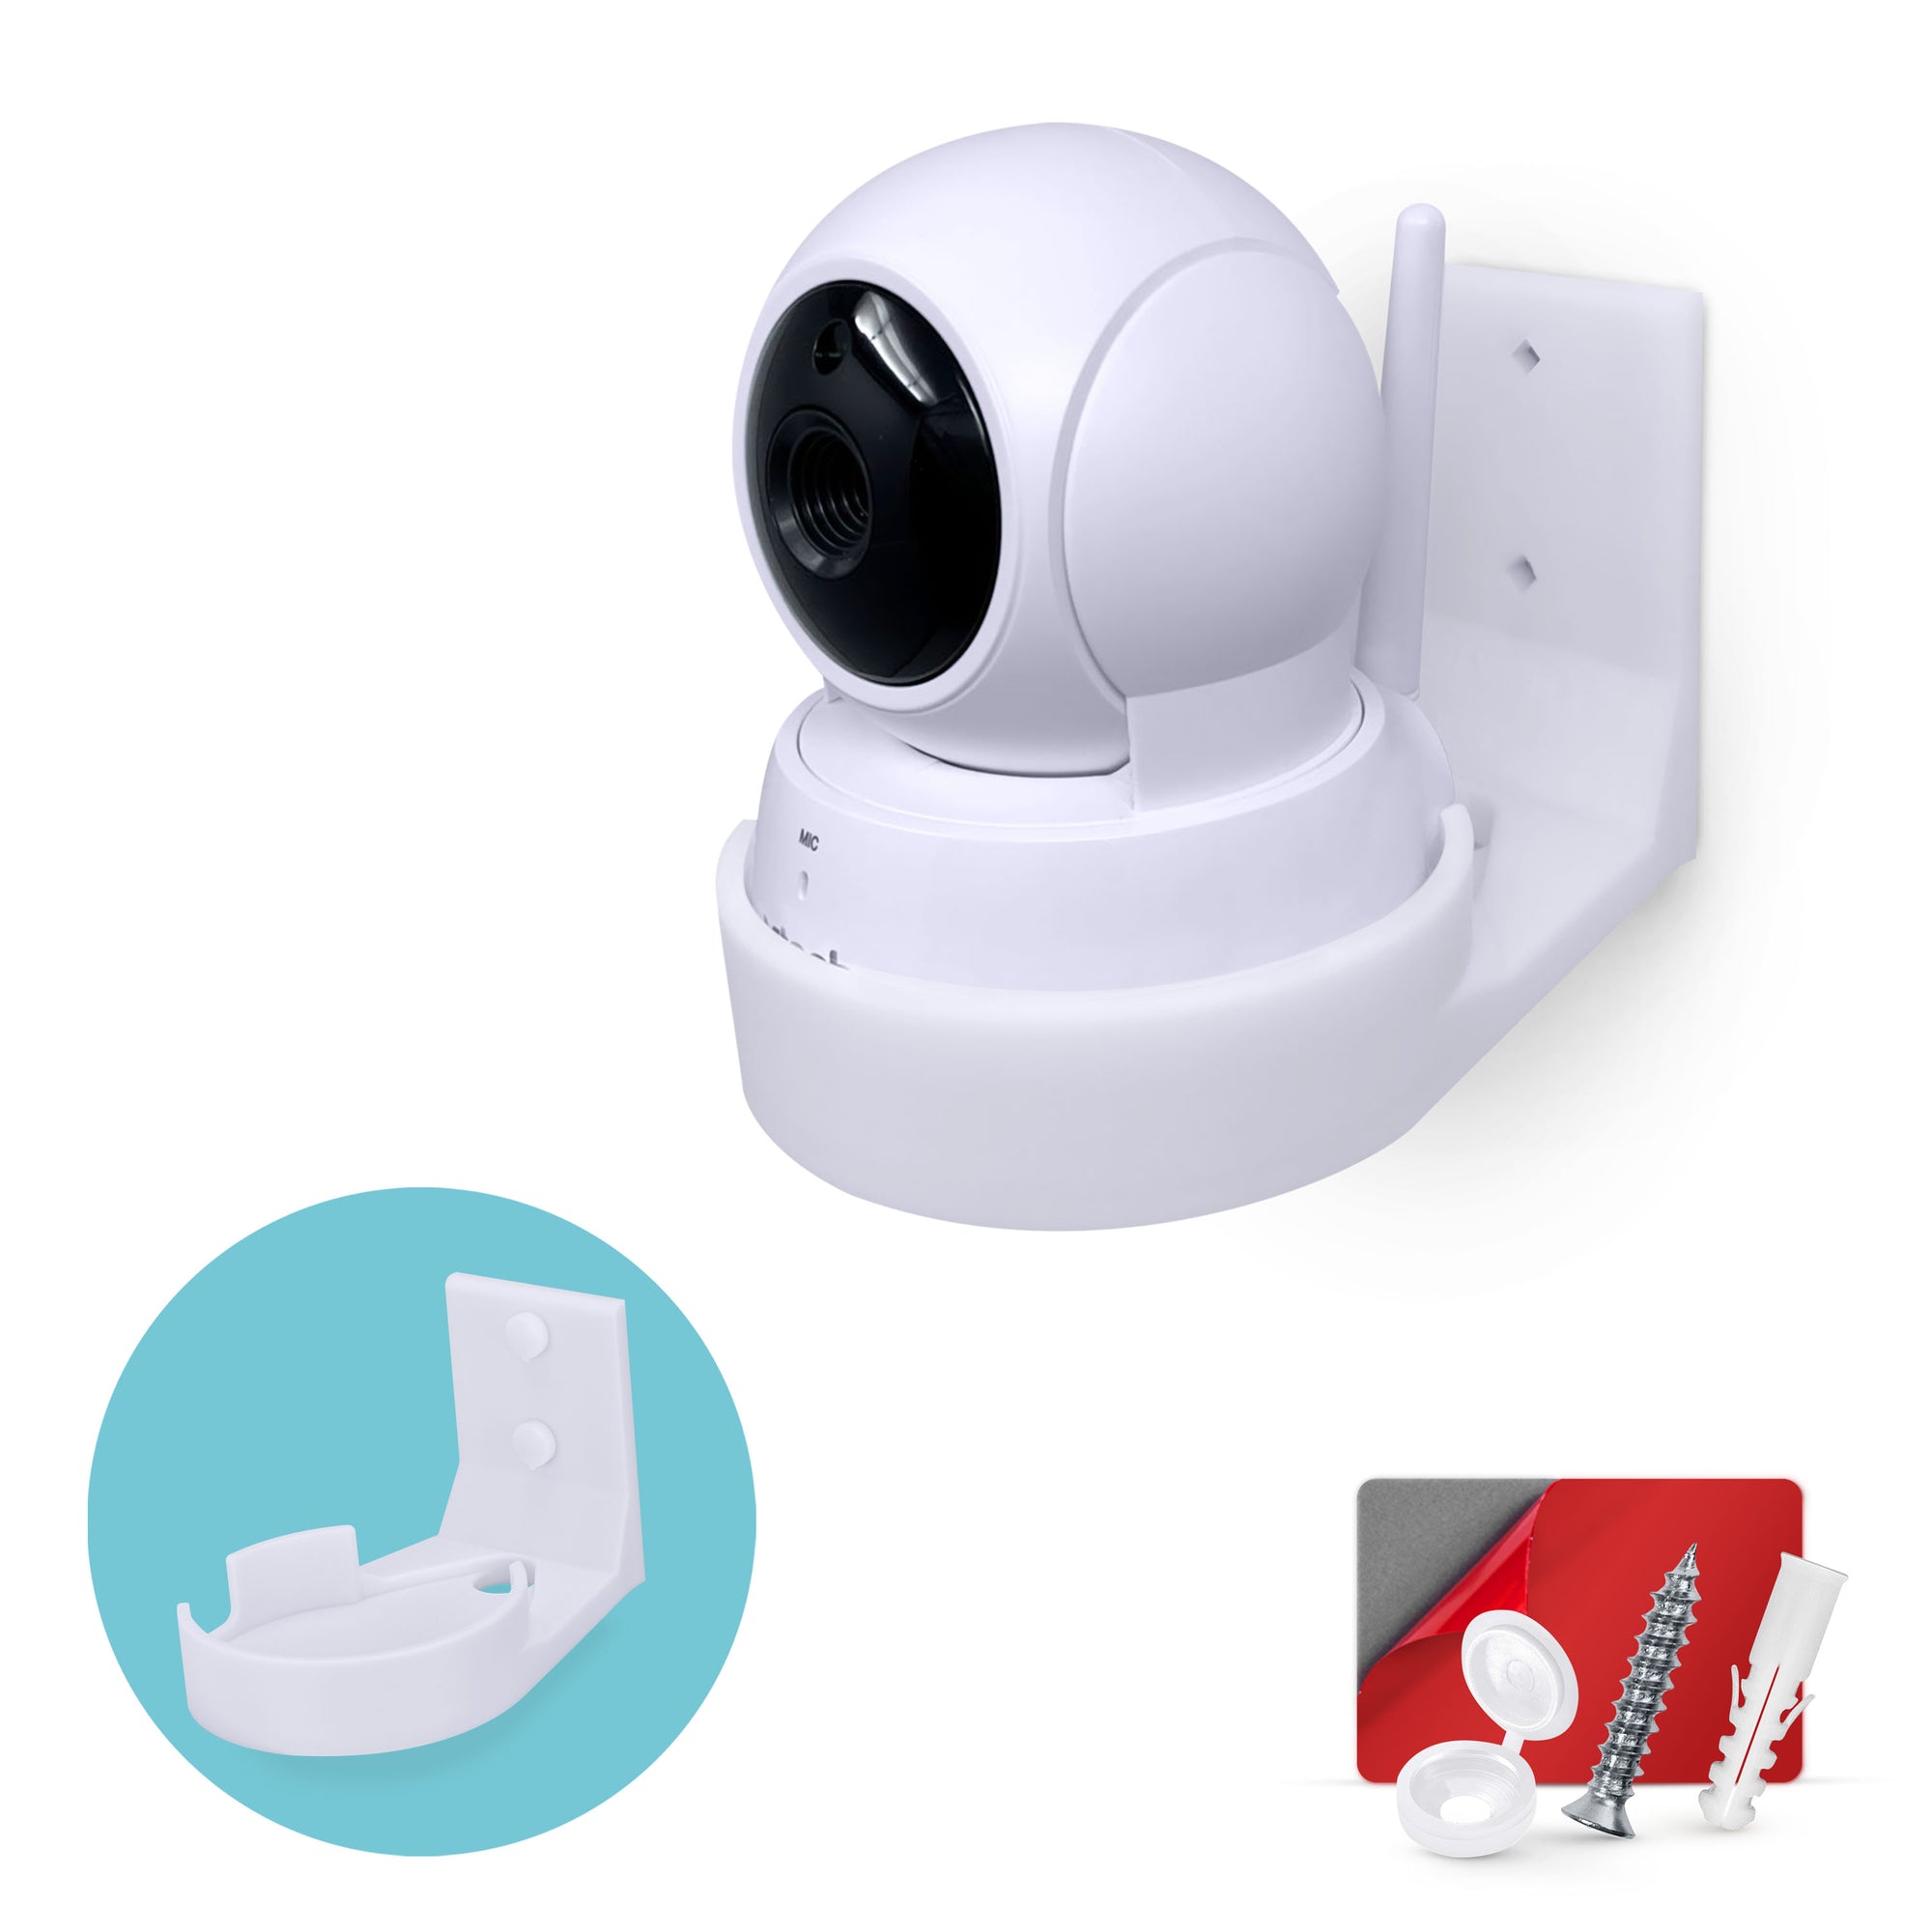 Drill Free Wall Mount For VTech ‎VM923 Camera, Easy To Install Holder with Strong Adhesive, No Mess, Reduces Blind Spots & Clutter